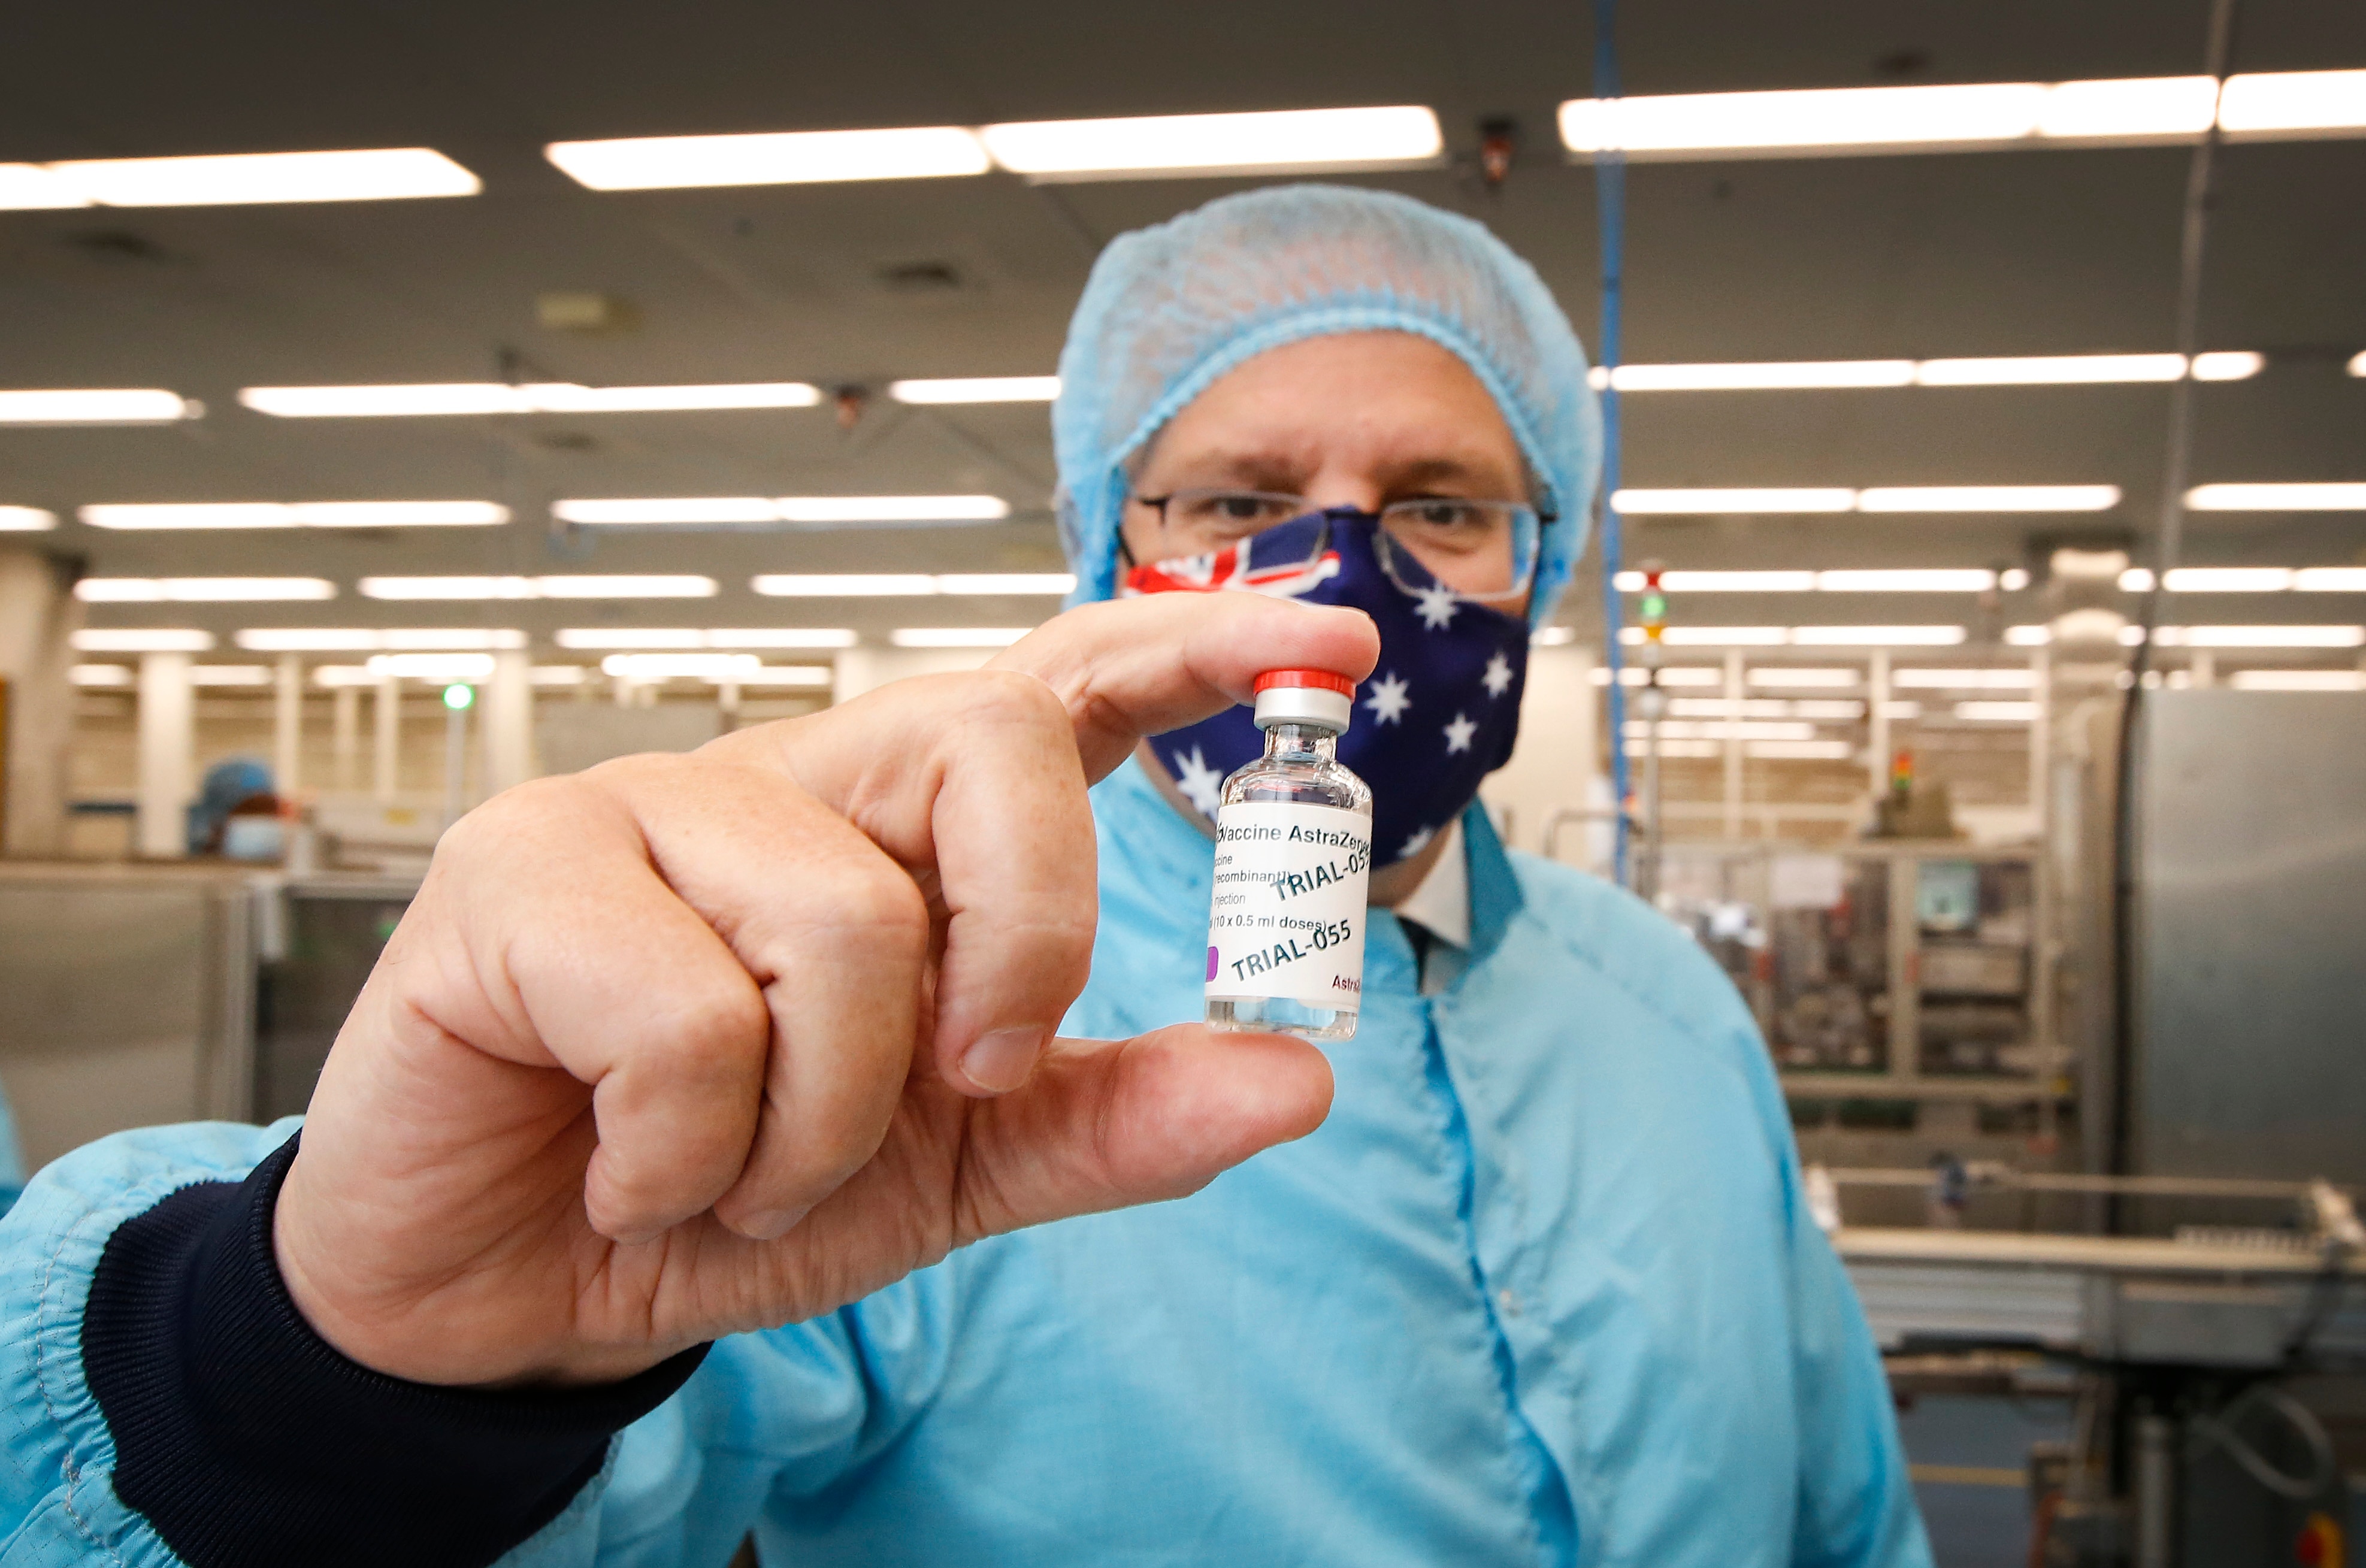 Prime Minister Scott Morrison holds a vial of AstraZeneca's coronavirus vaccine during a visit to the CSL lab in Parkville, Melbourne.